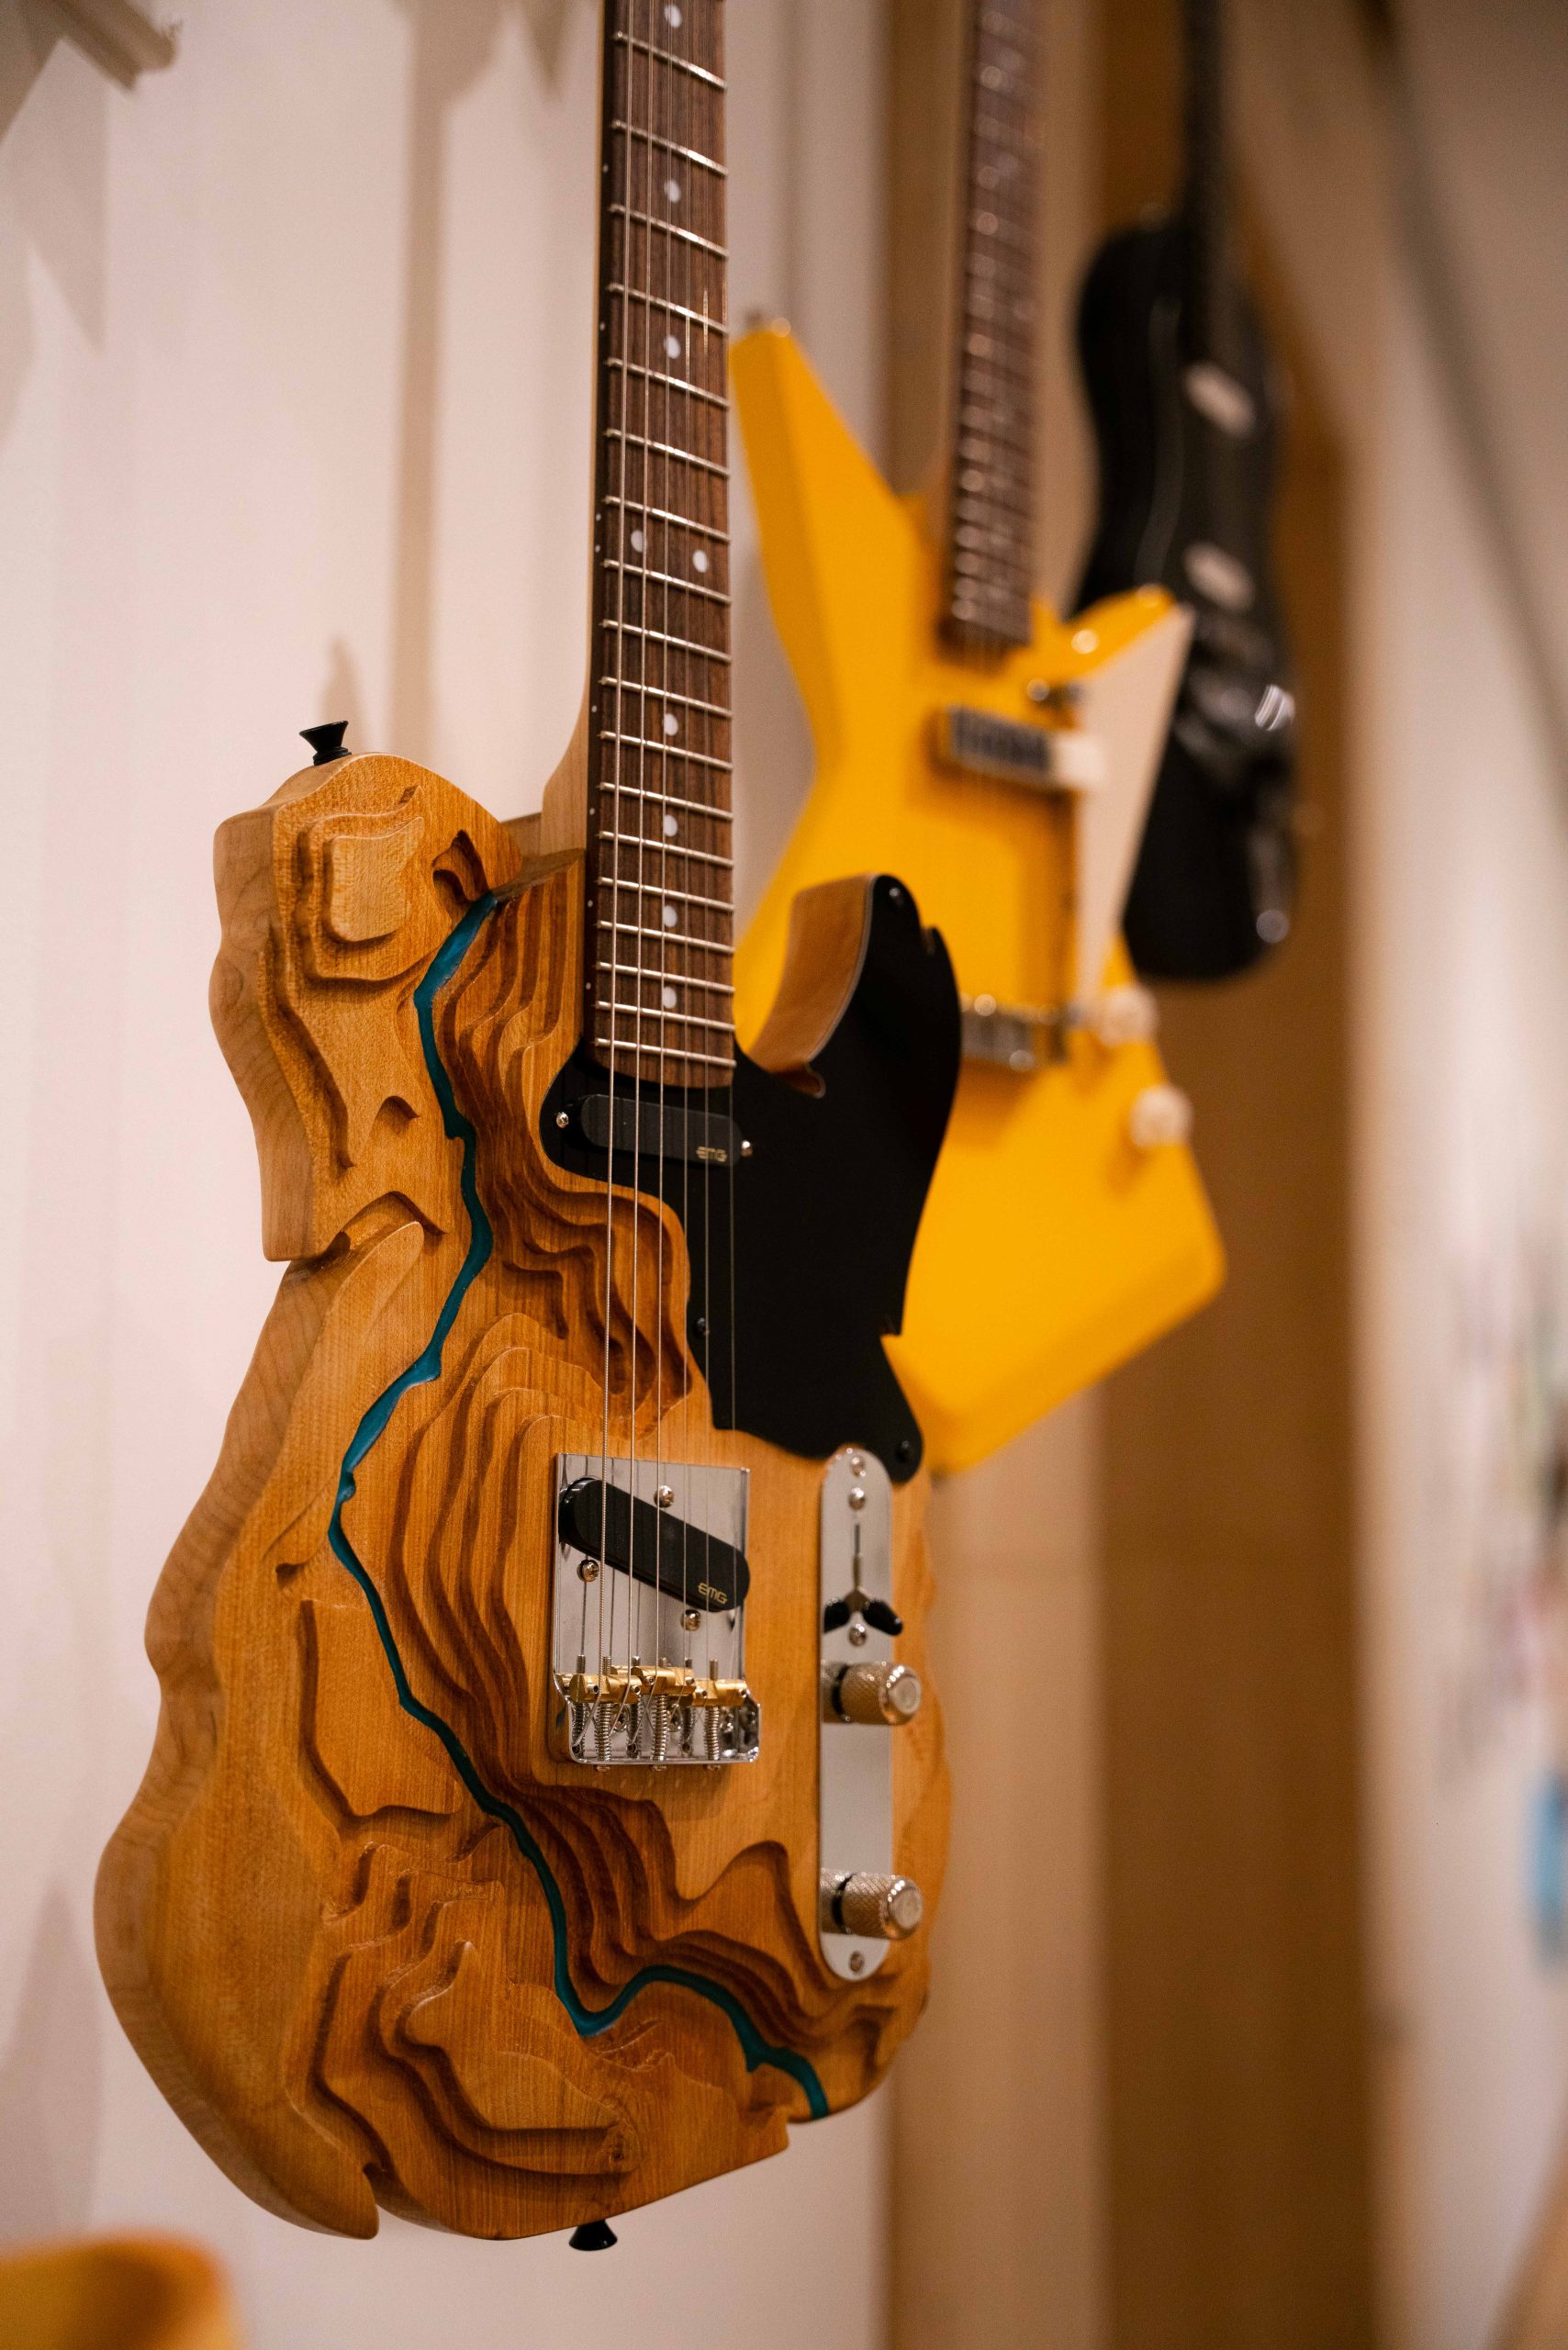 A wooden electric guitar carved to look like a topographical map of a river